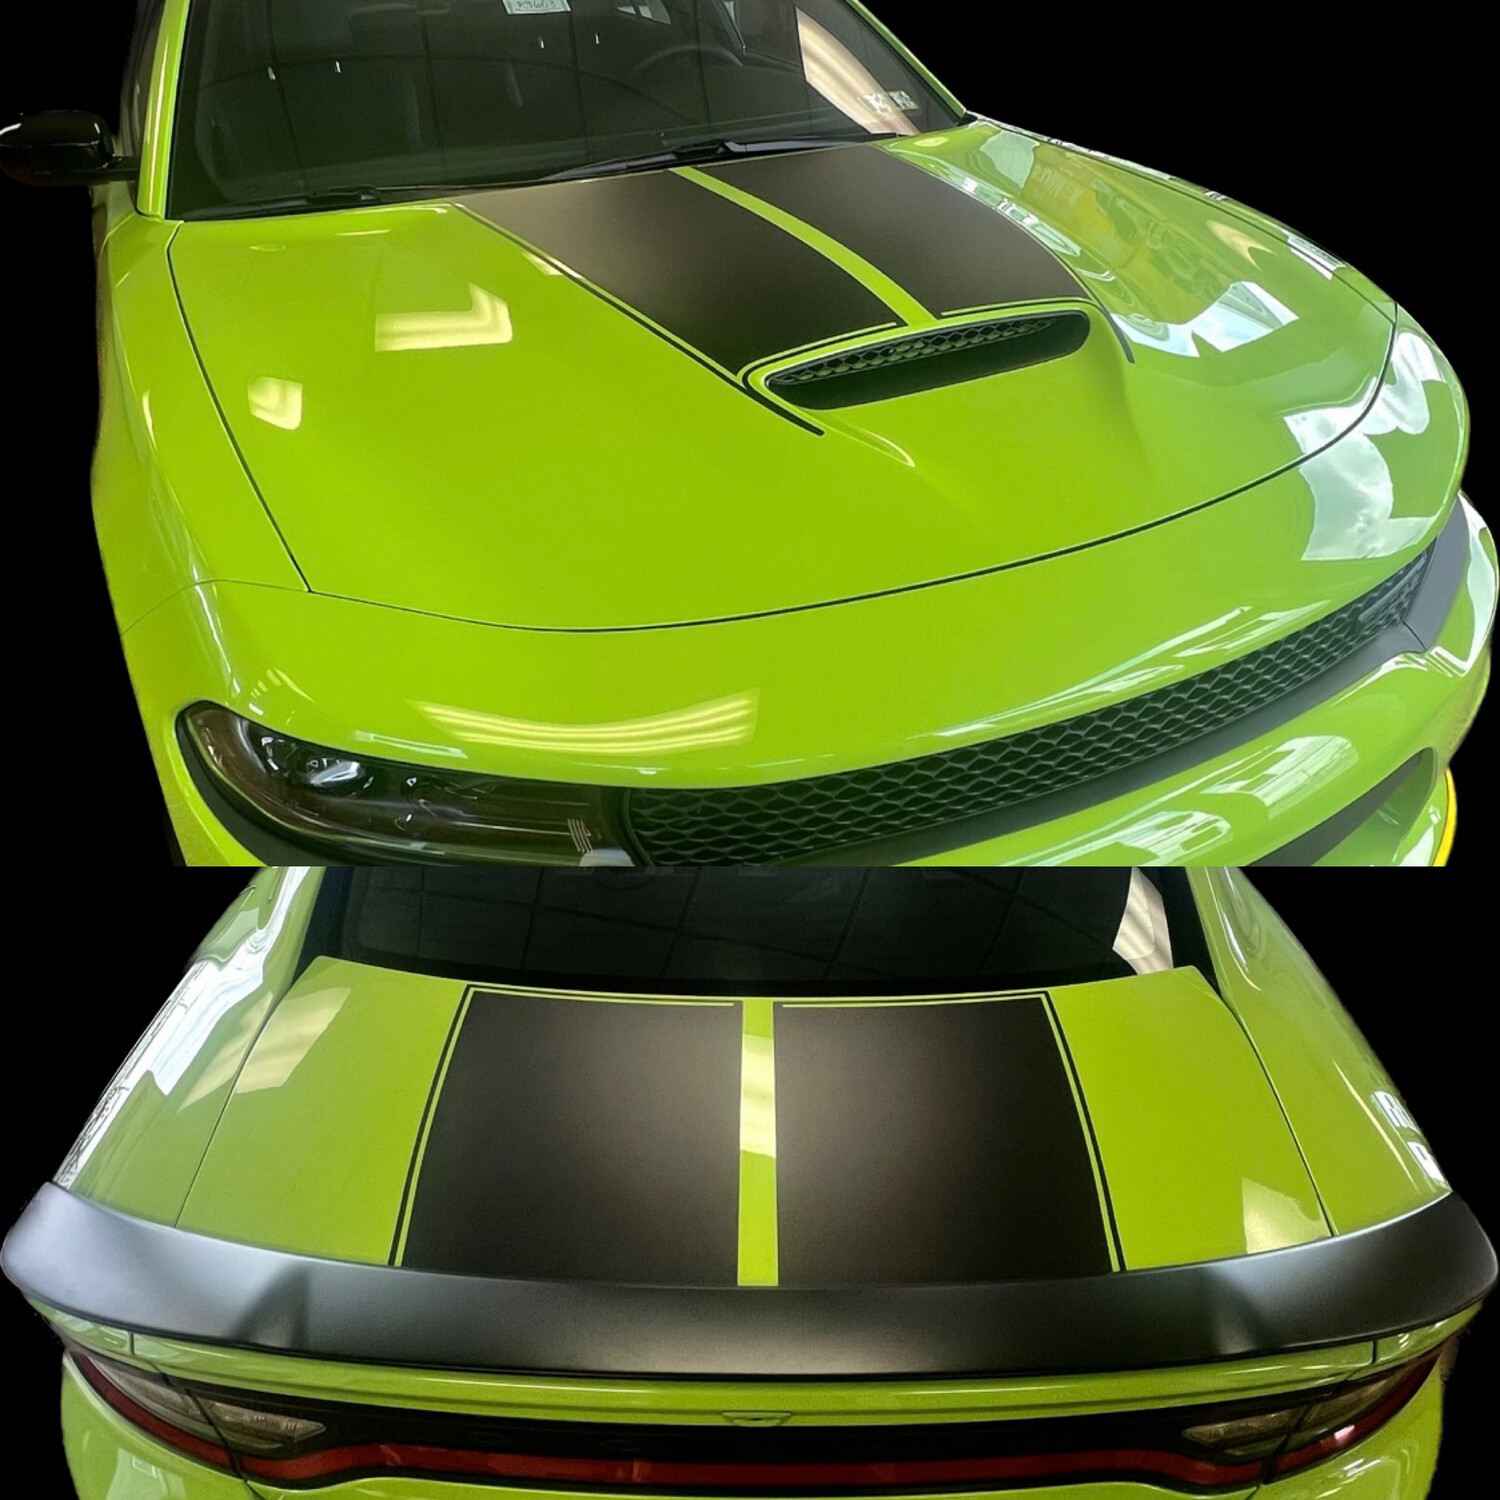 2015 - Up Dodge Charger SRT Hellcat RT GT Scat Pack 6 Piece Hood/Trunk/Spoiler Rally Stripes